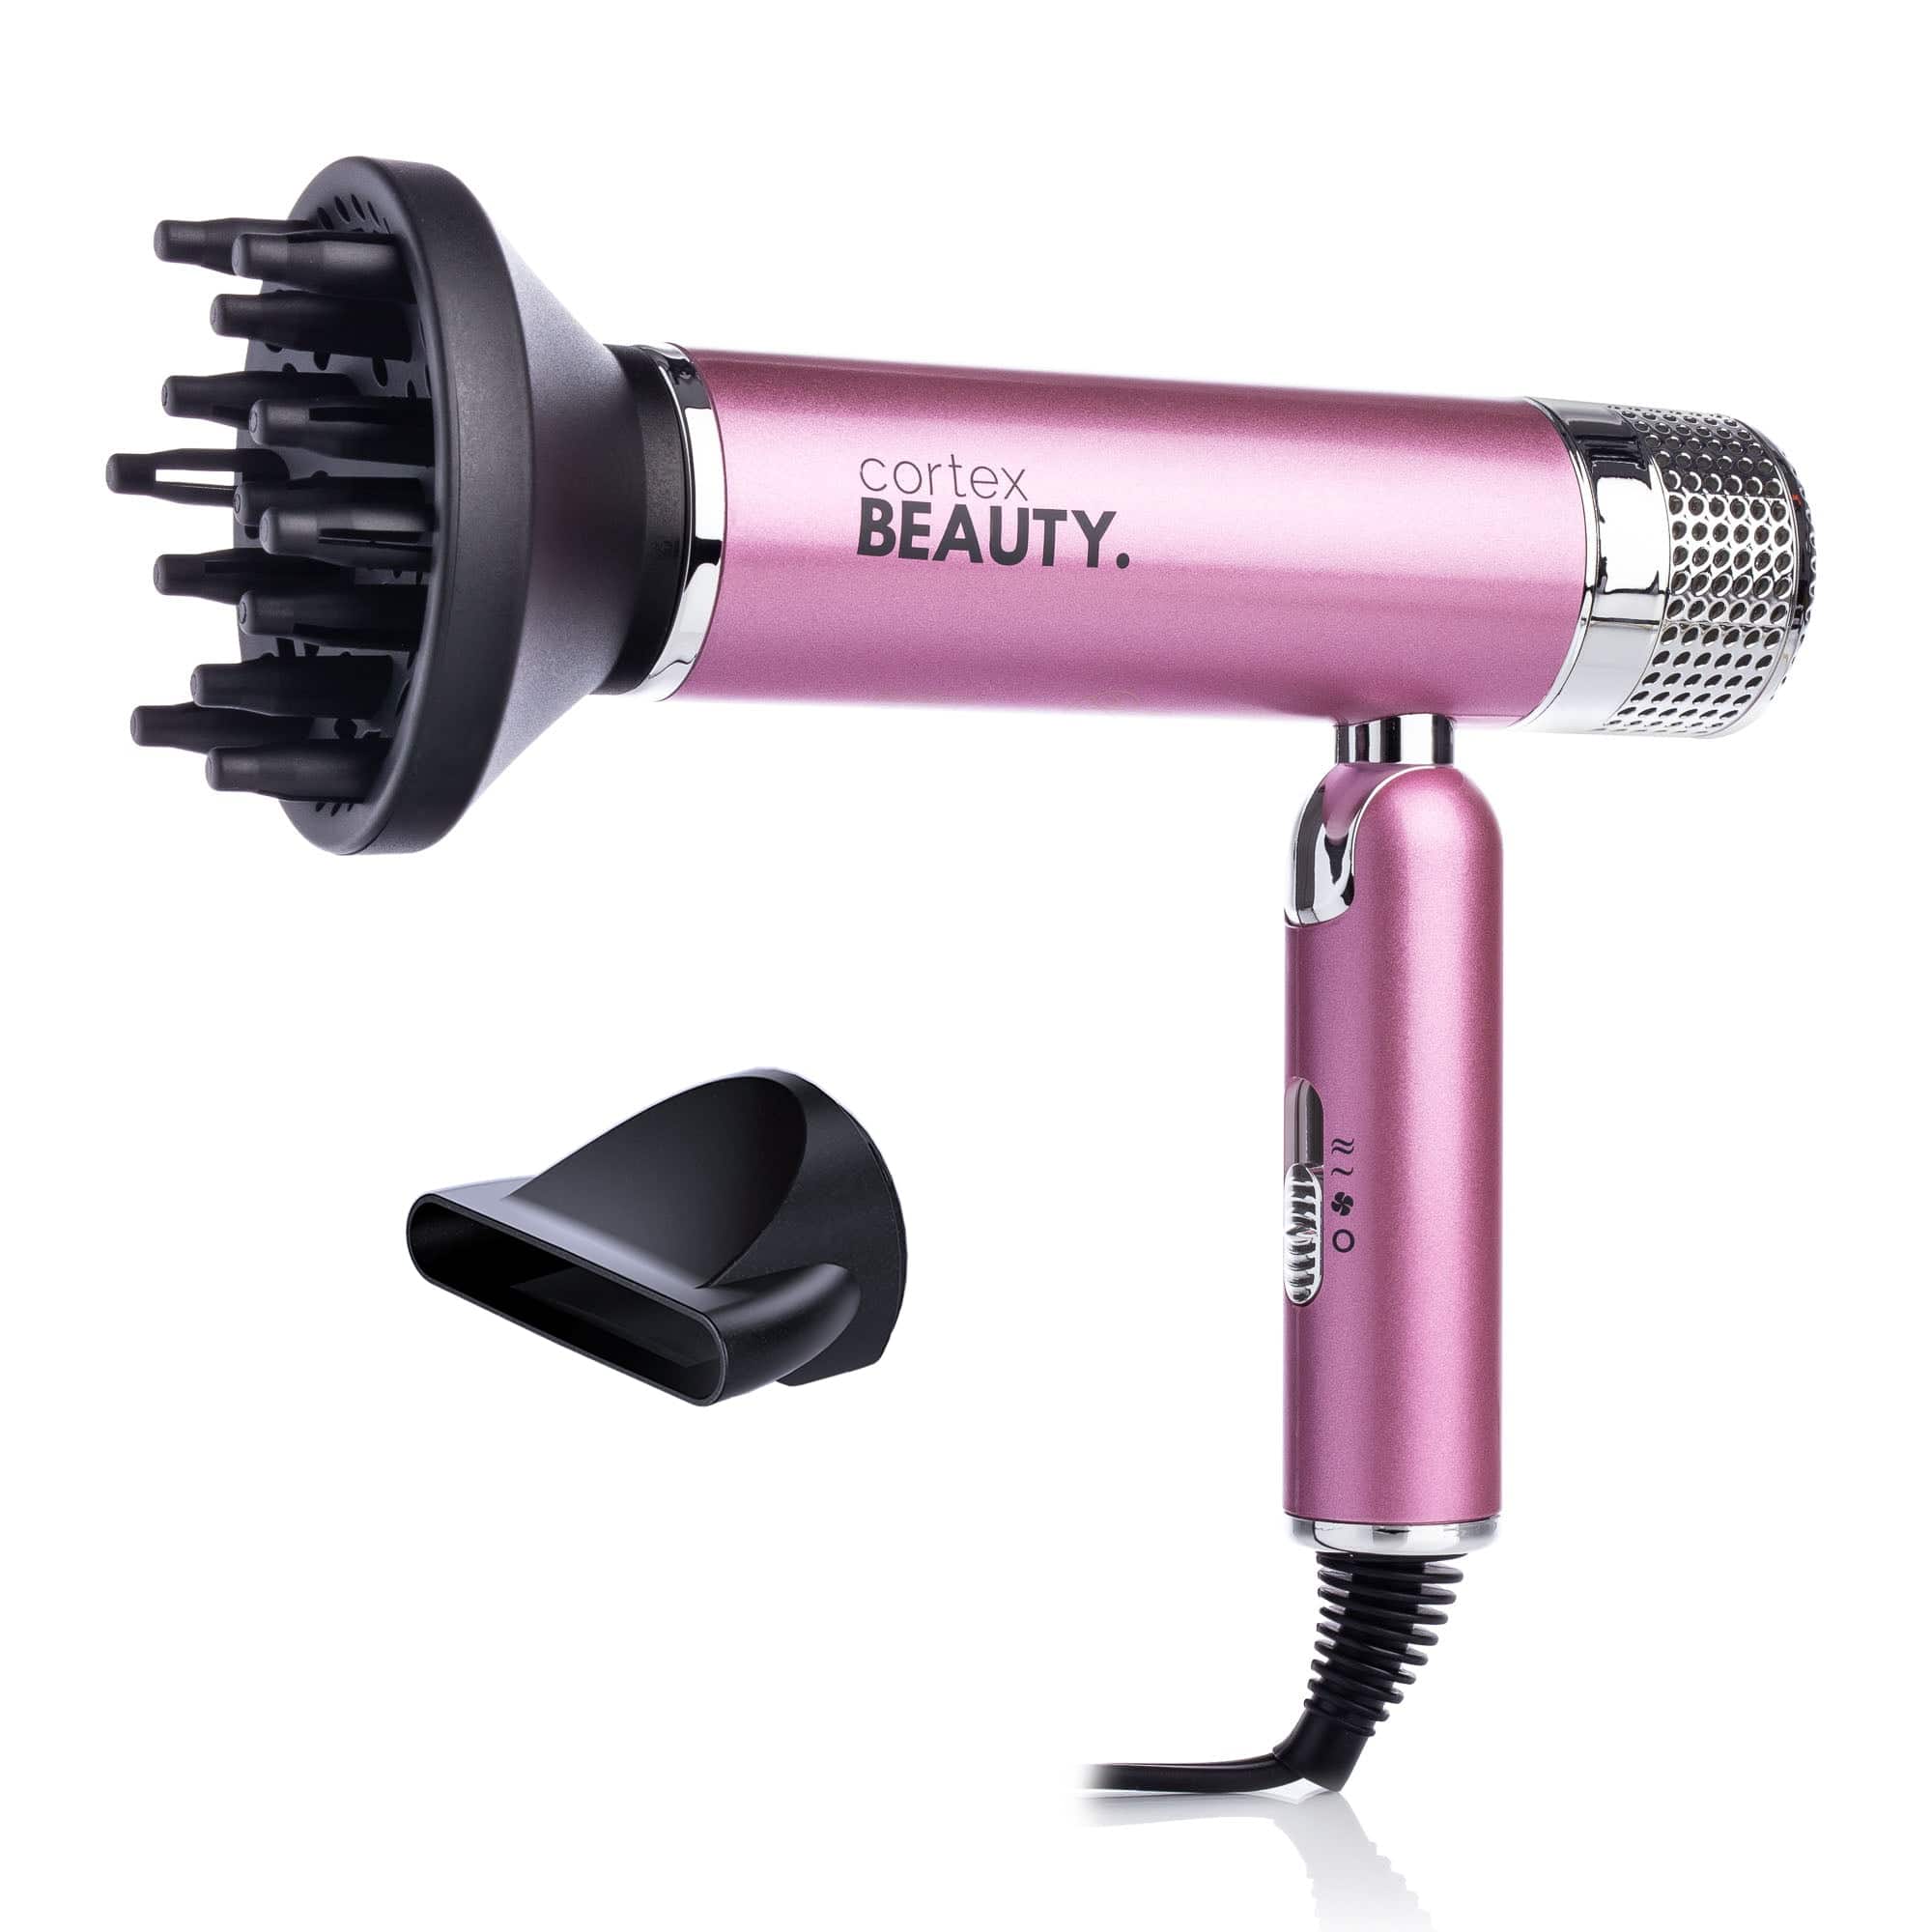 SlimLiner | Turbo-Charged Foldable Hair Dryer